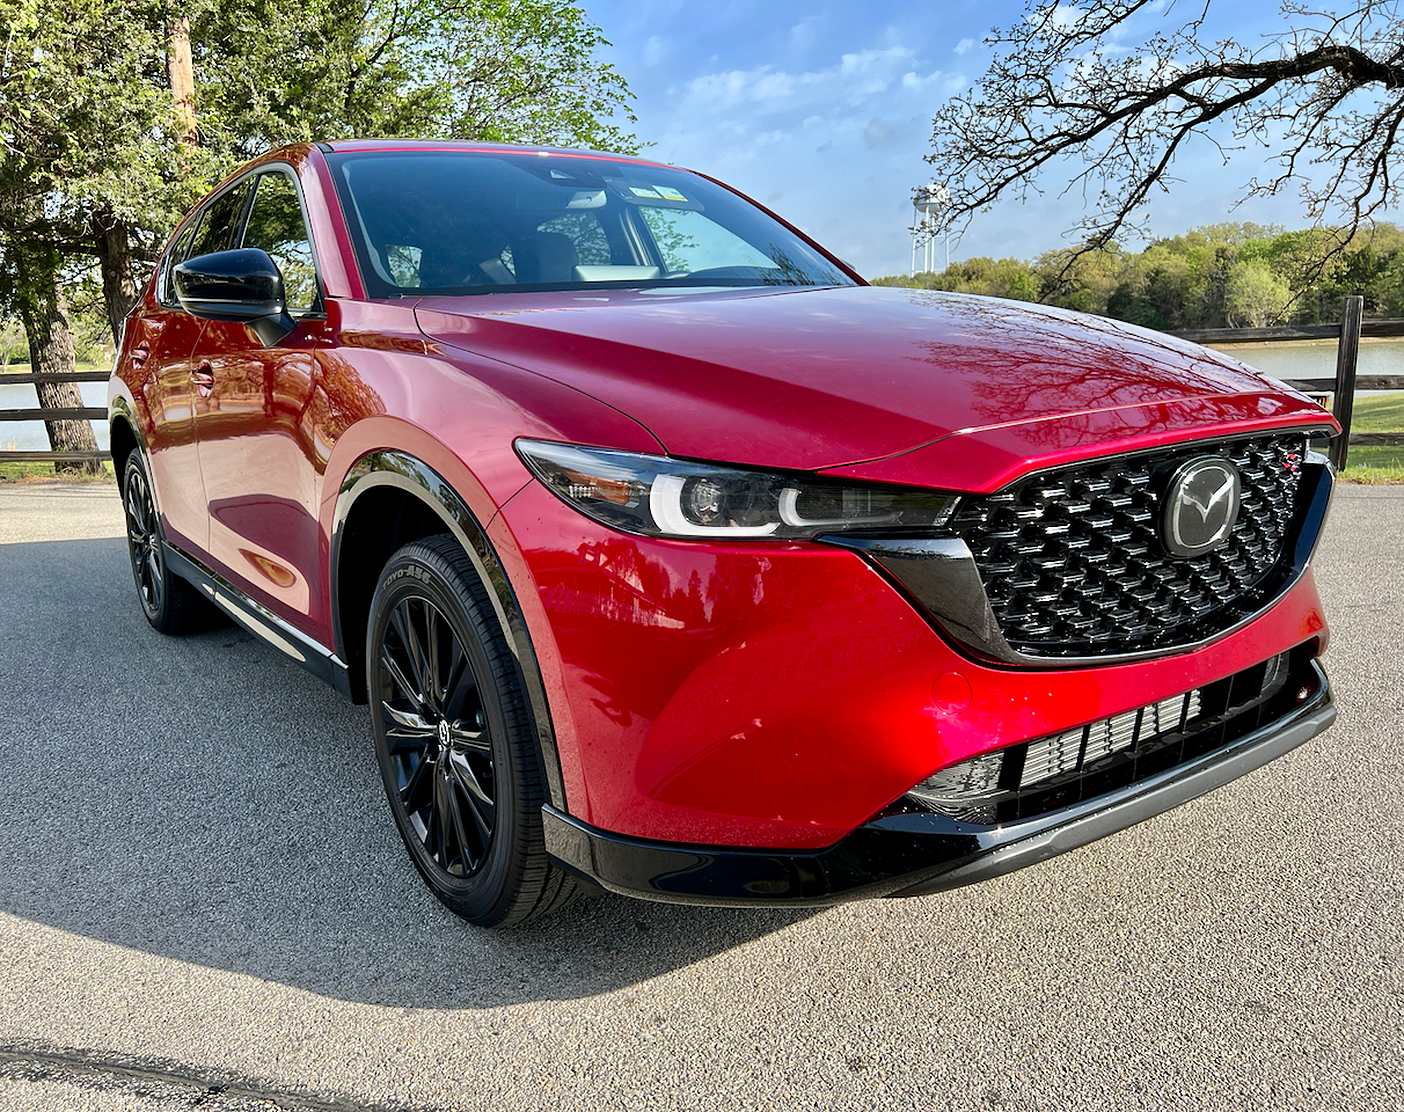 5 things that define the Mazda CX-5